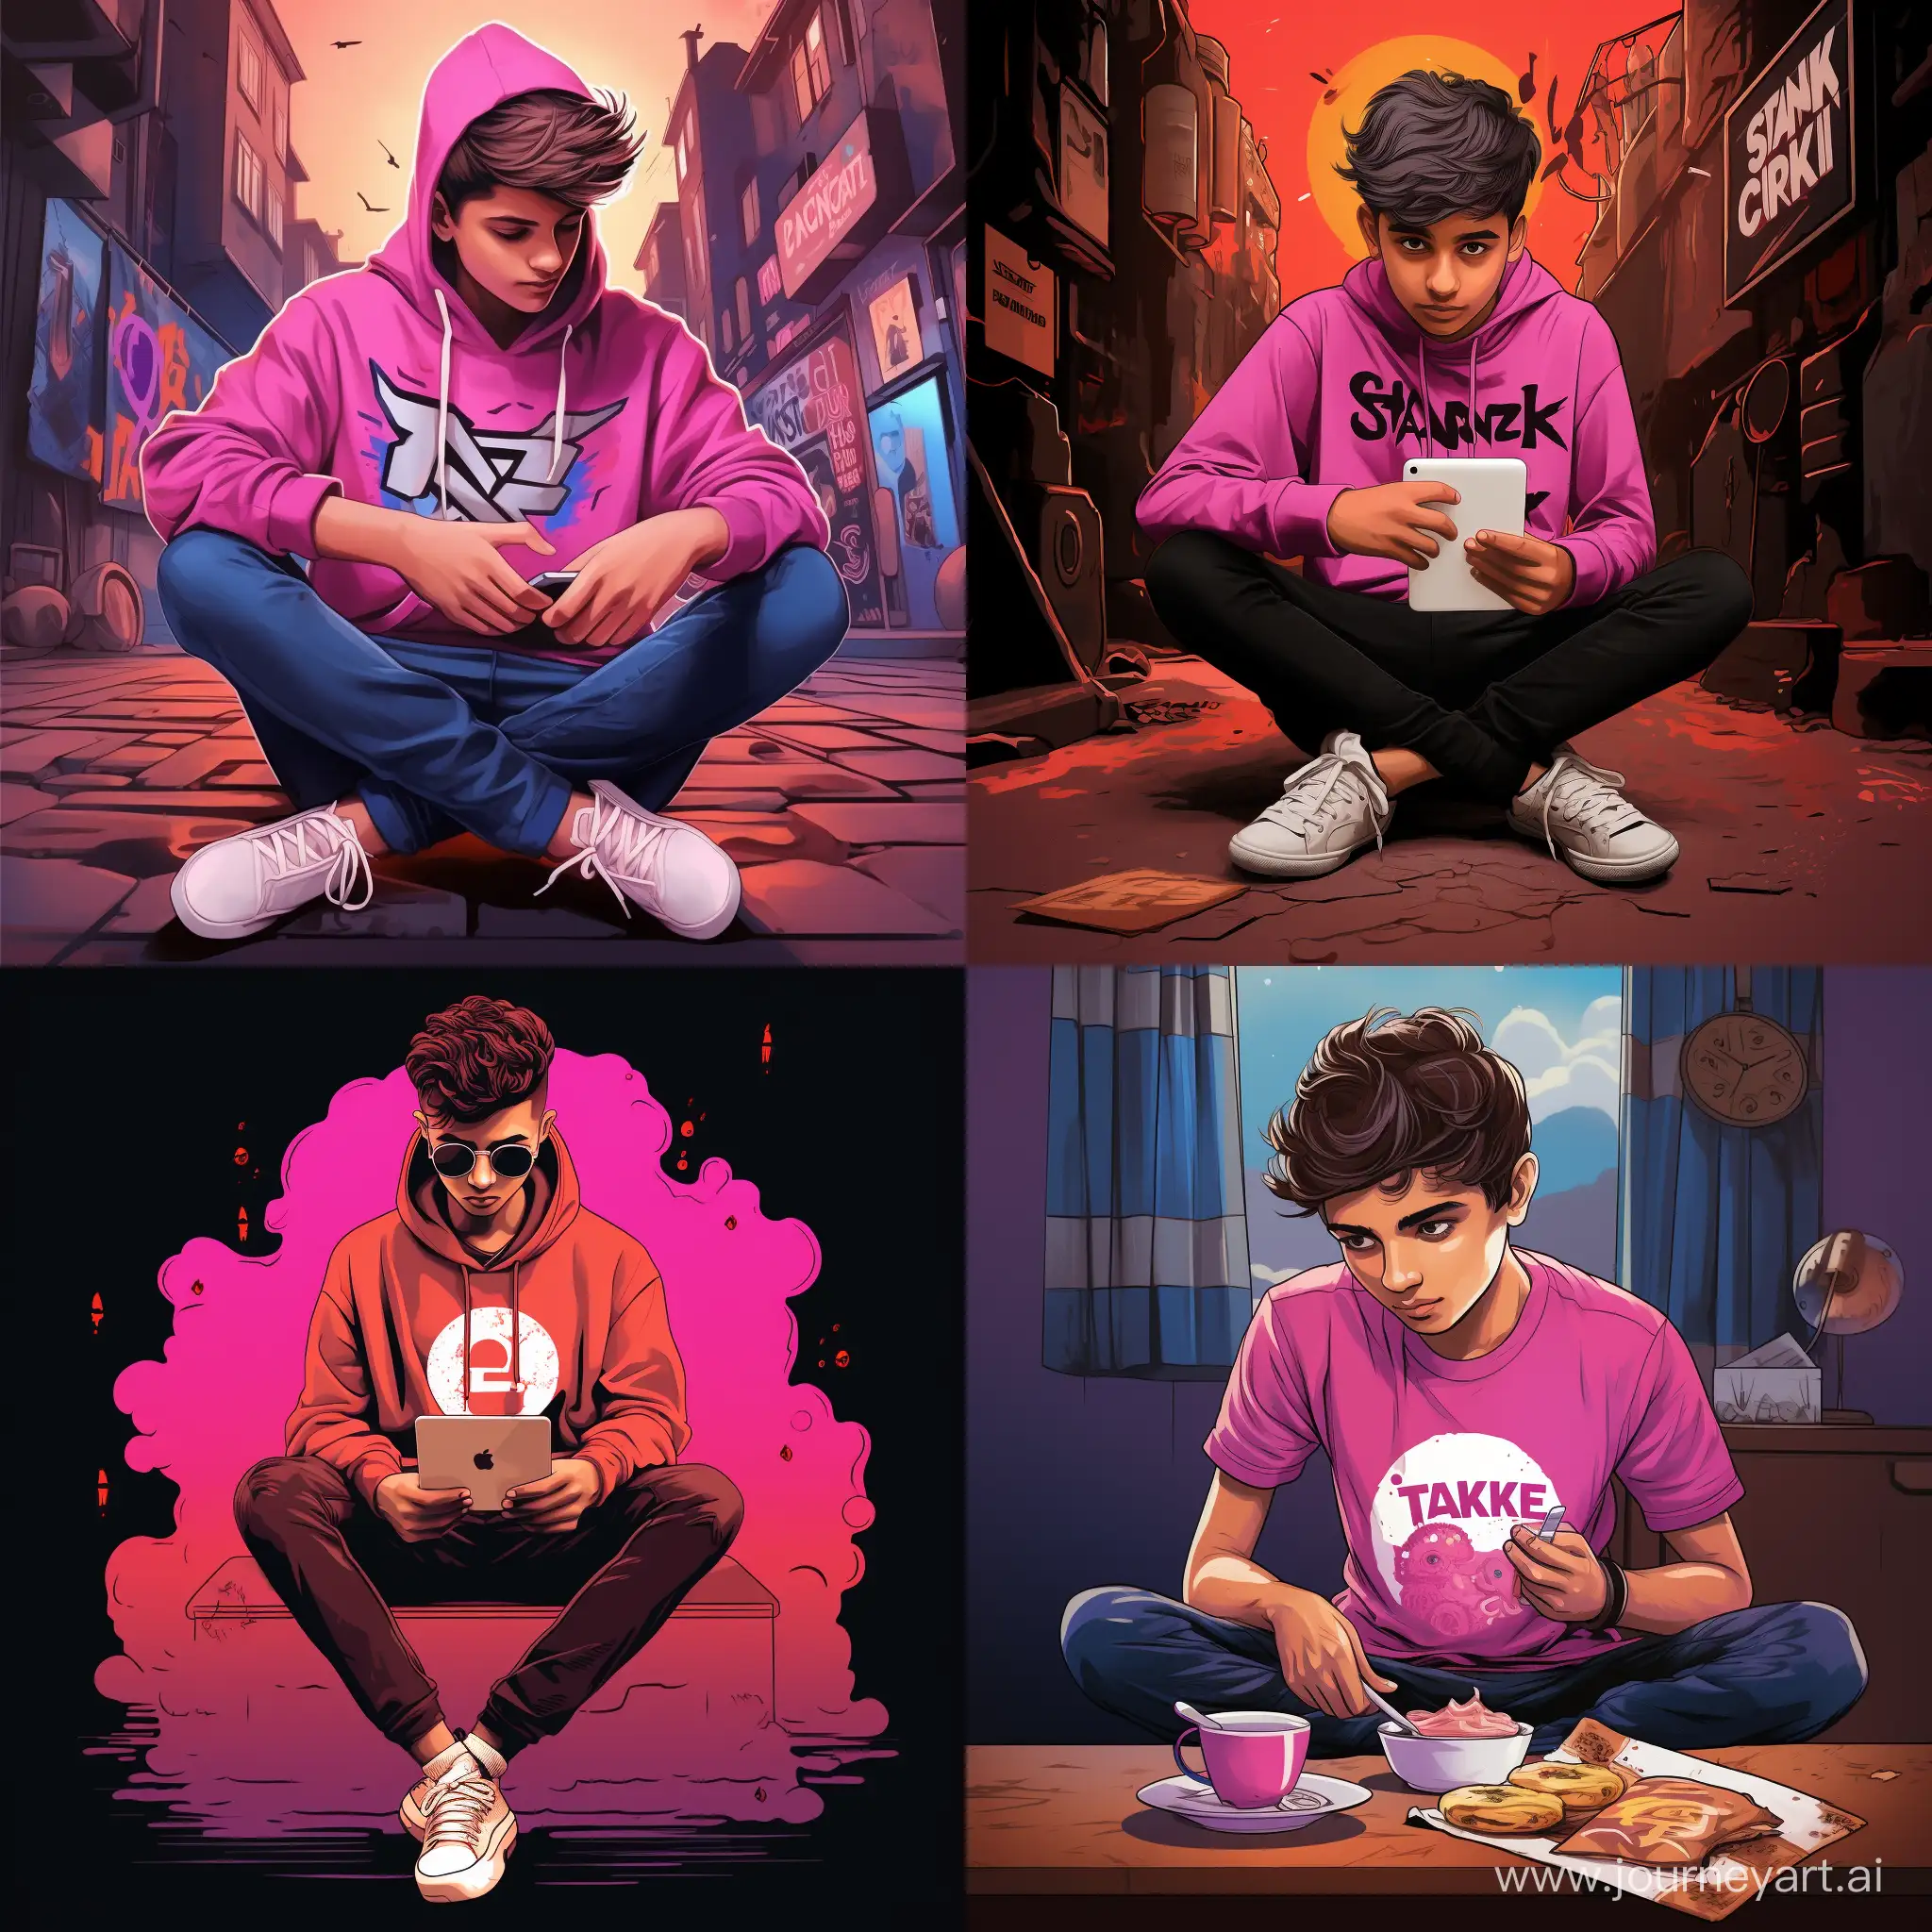 A teenager boy sit on the Instagram logo, with pink teashirt and name on the teashirt is Sanket